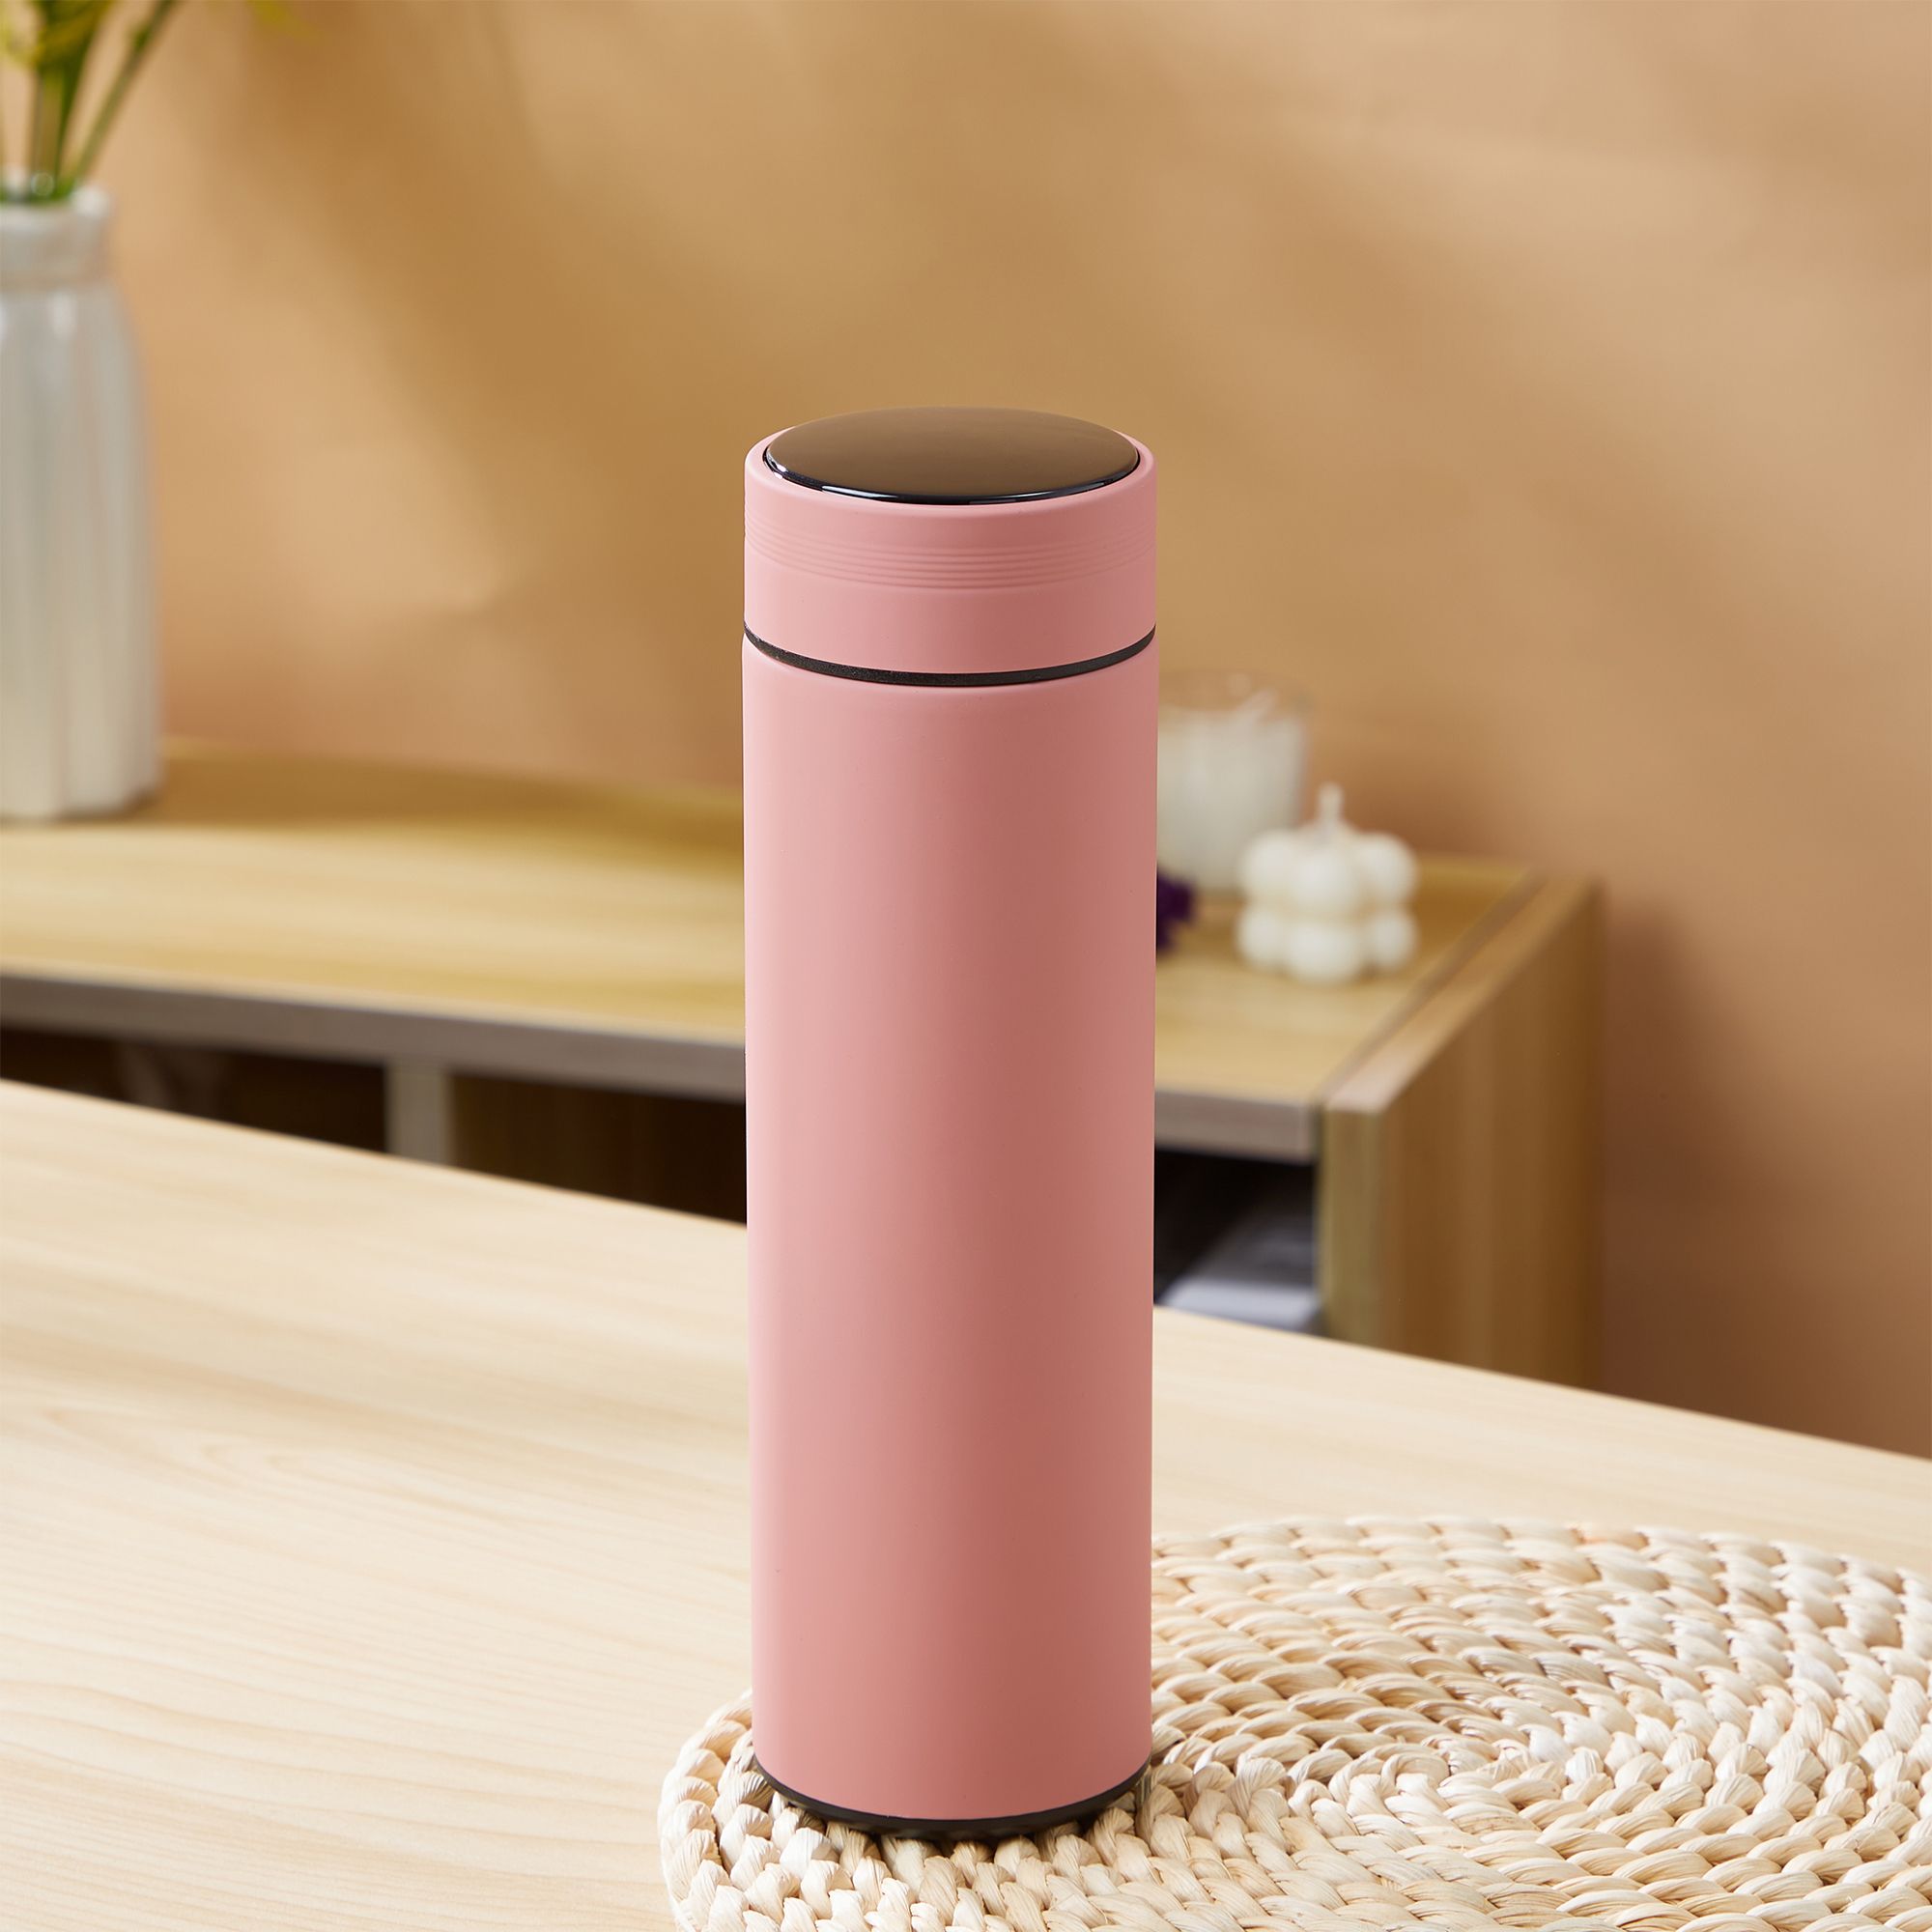 Morandi Color Stainless Steel Thermos Bottle With Intelligent Temperature Measurement Function